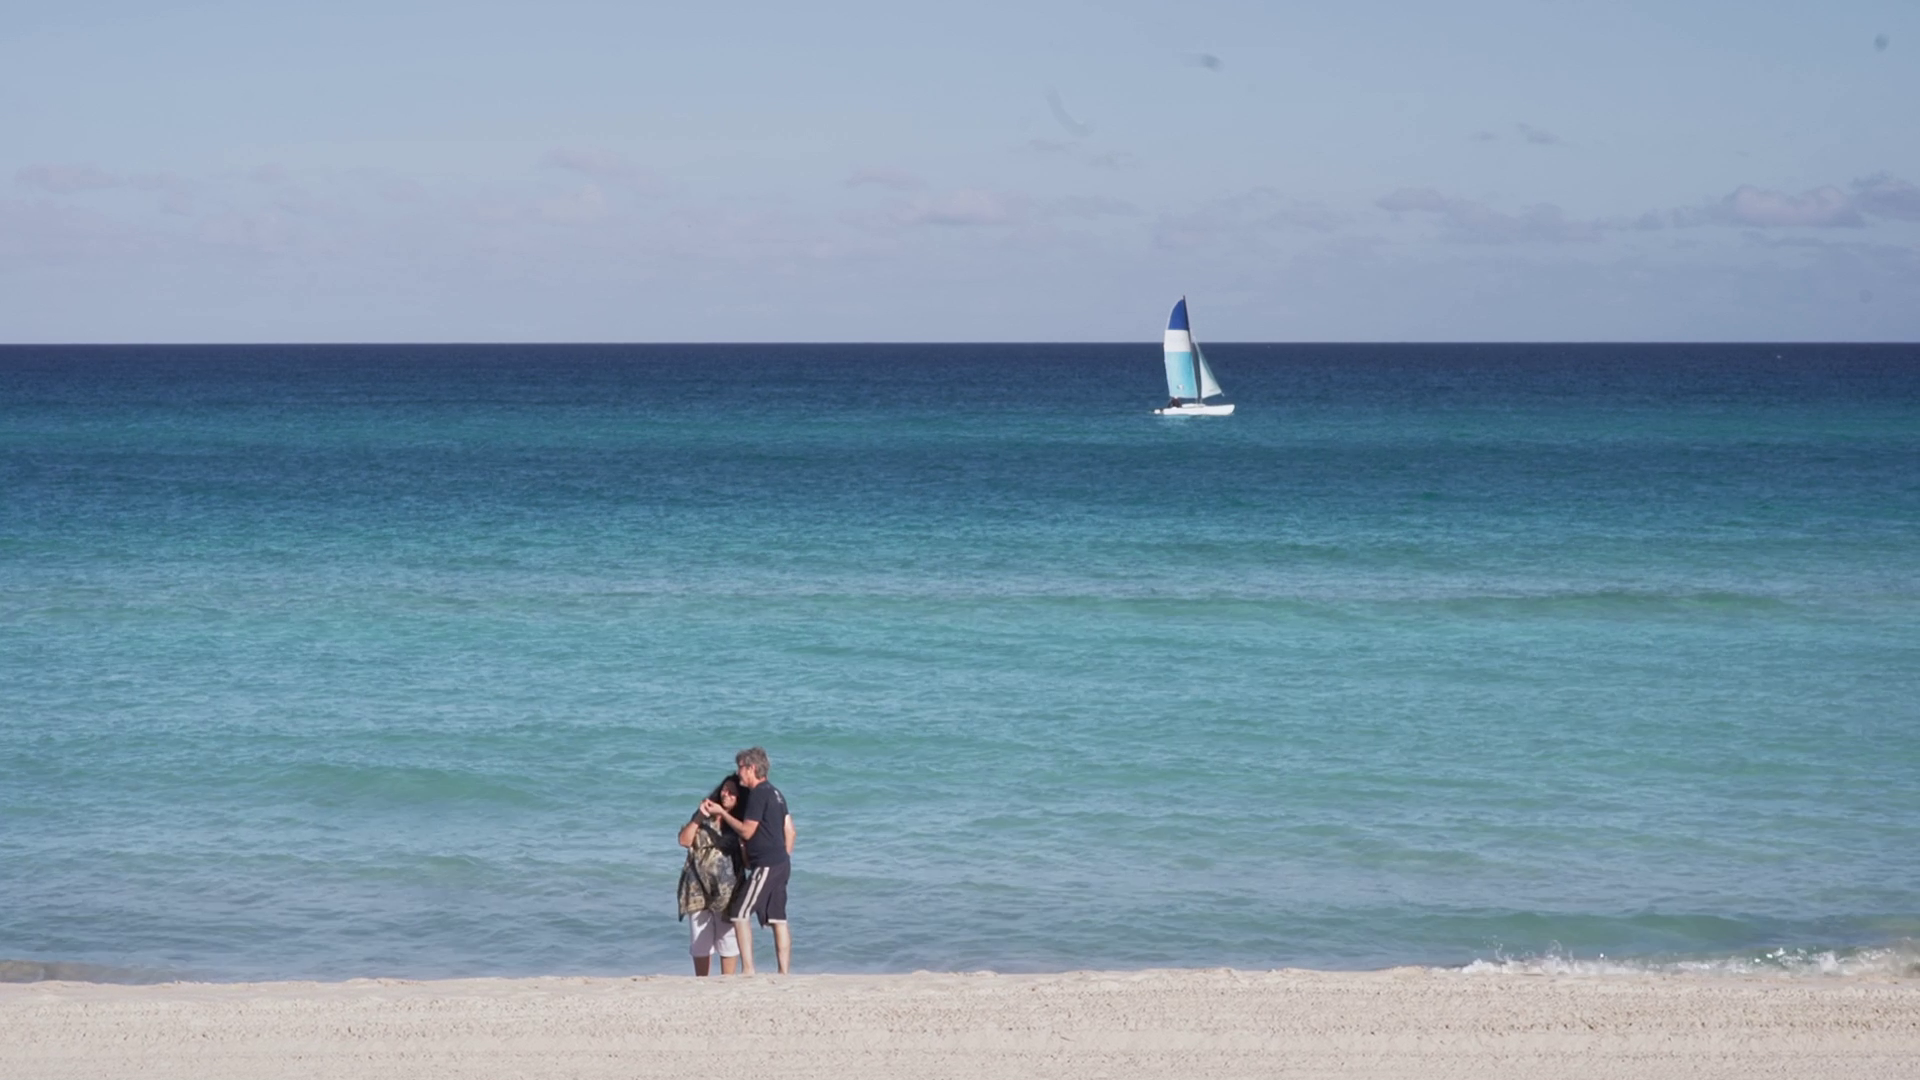 Two people are standing on a white sandy beach next to the sea. On the blue water a sailboat passes in the background.